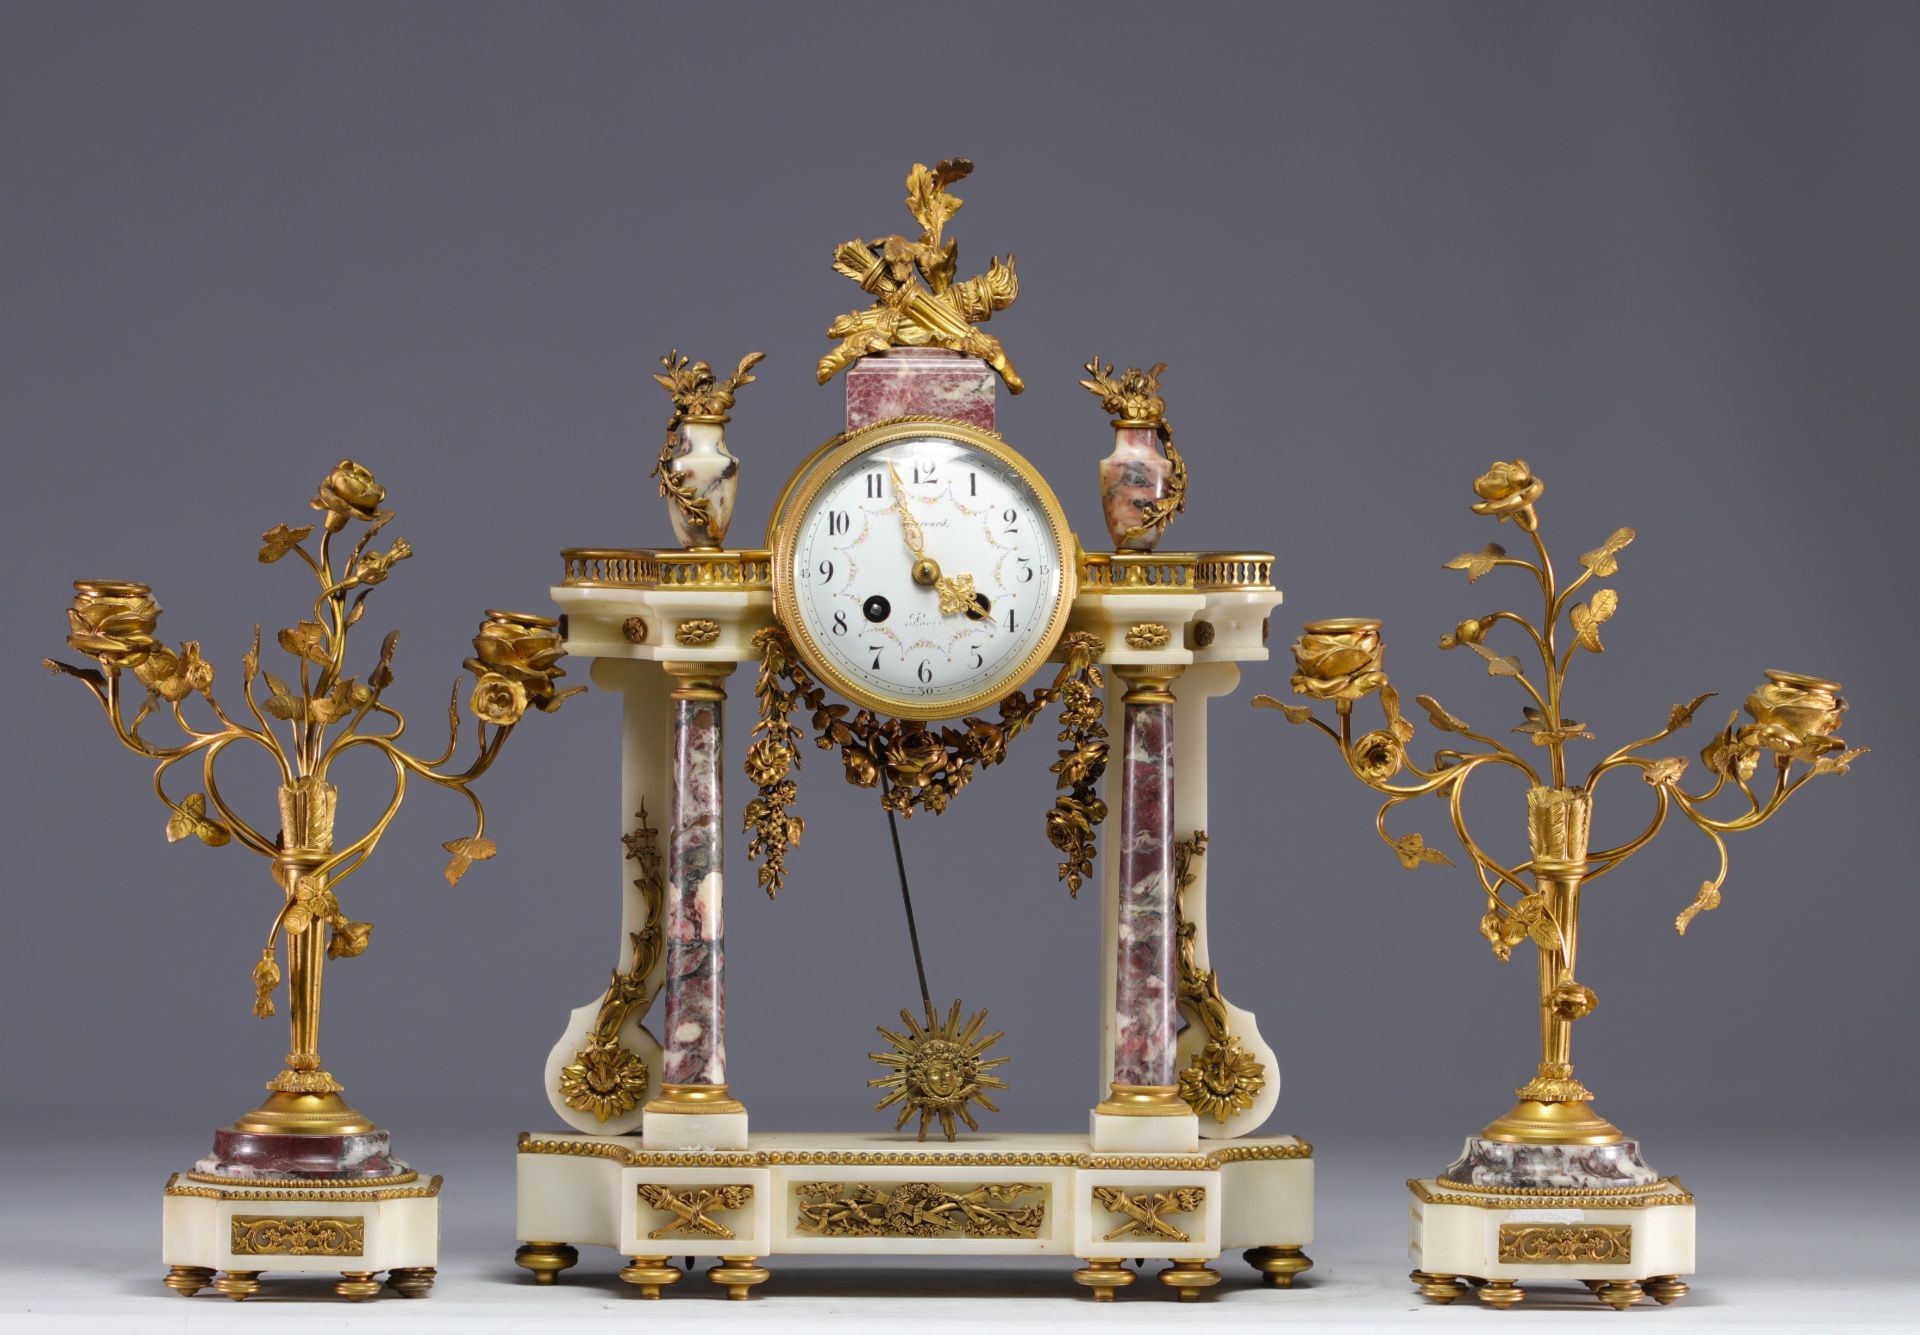 Louis XVI style portico clock and candlesticks in Carrara marble and gilt bronze